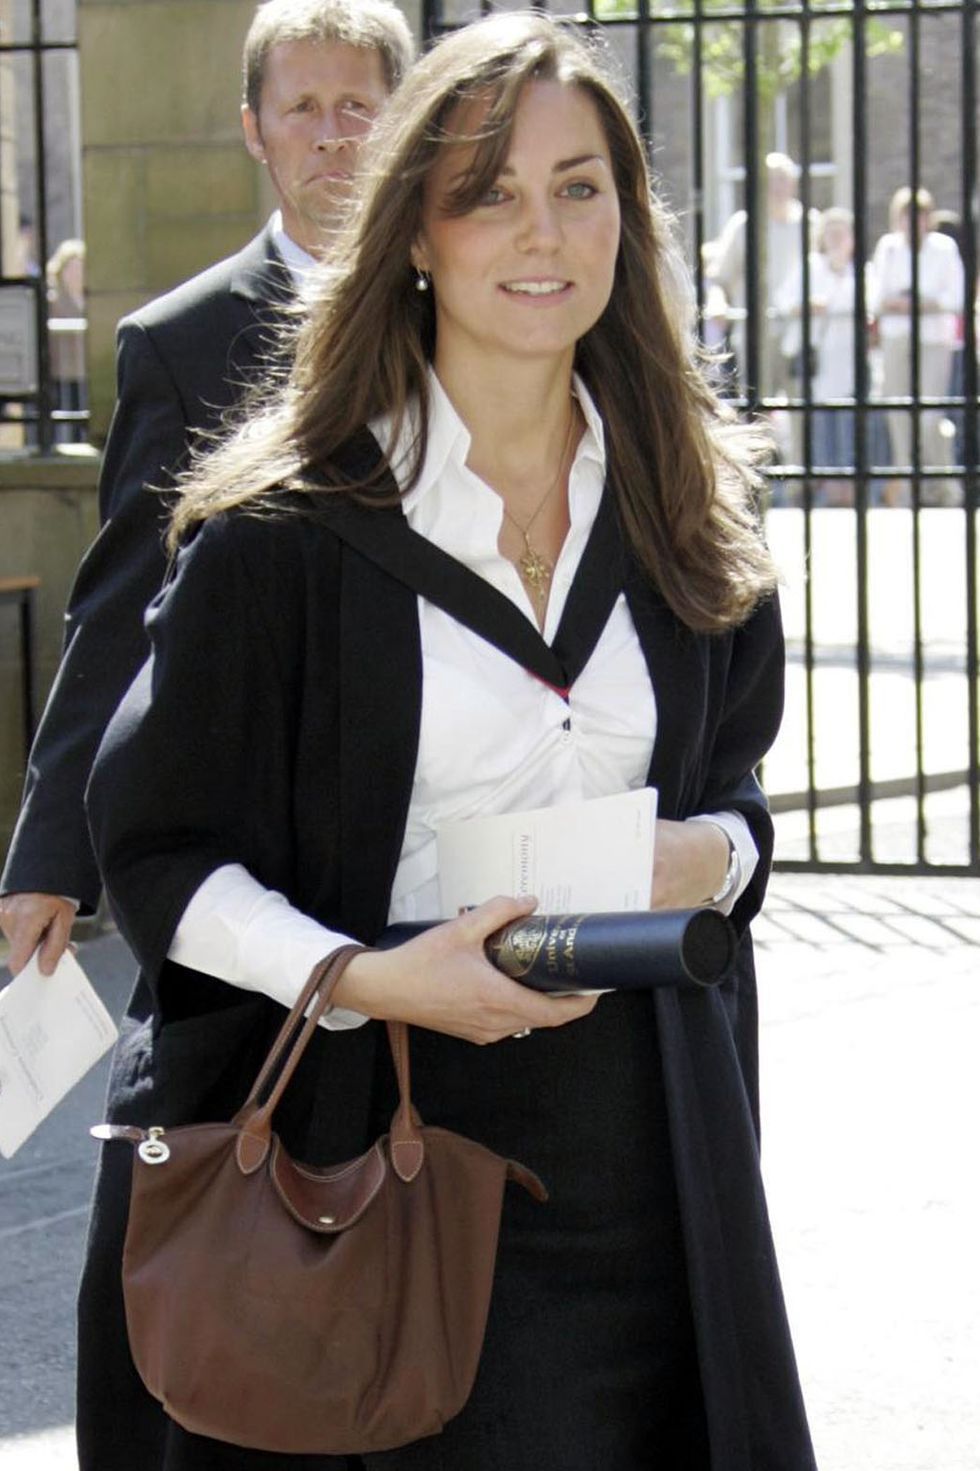 kate middleton girlfriend of prince william during their news photo 1590004478